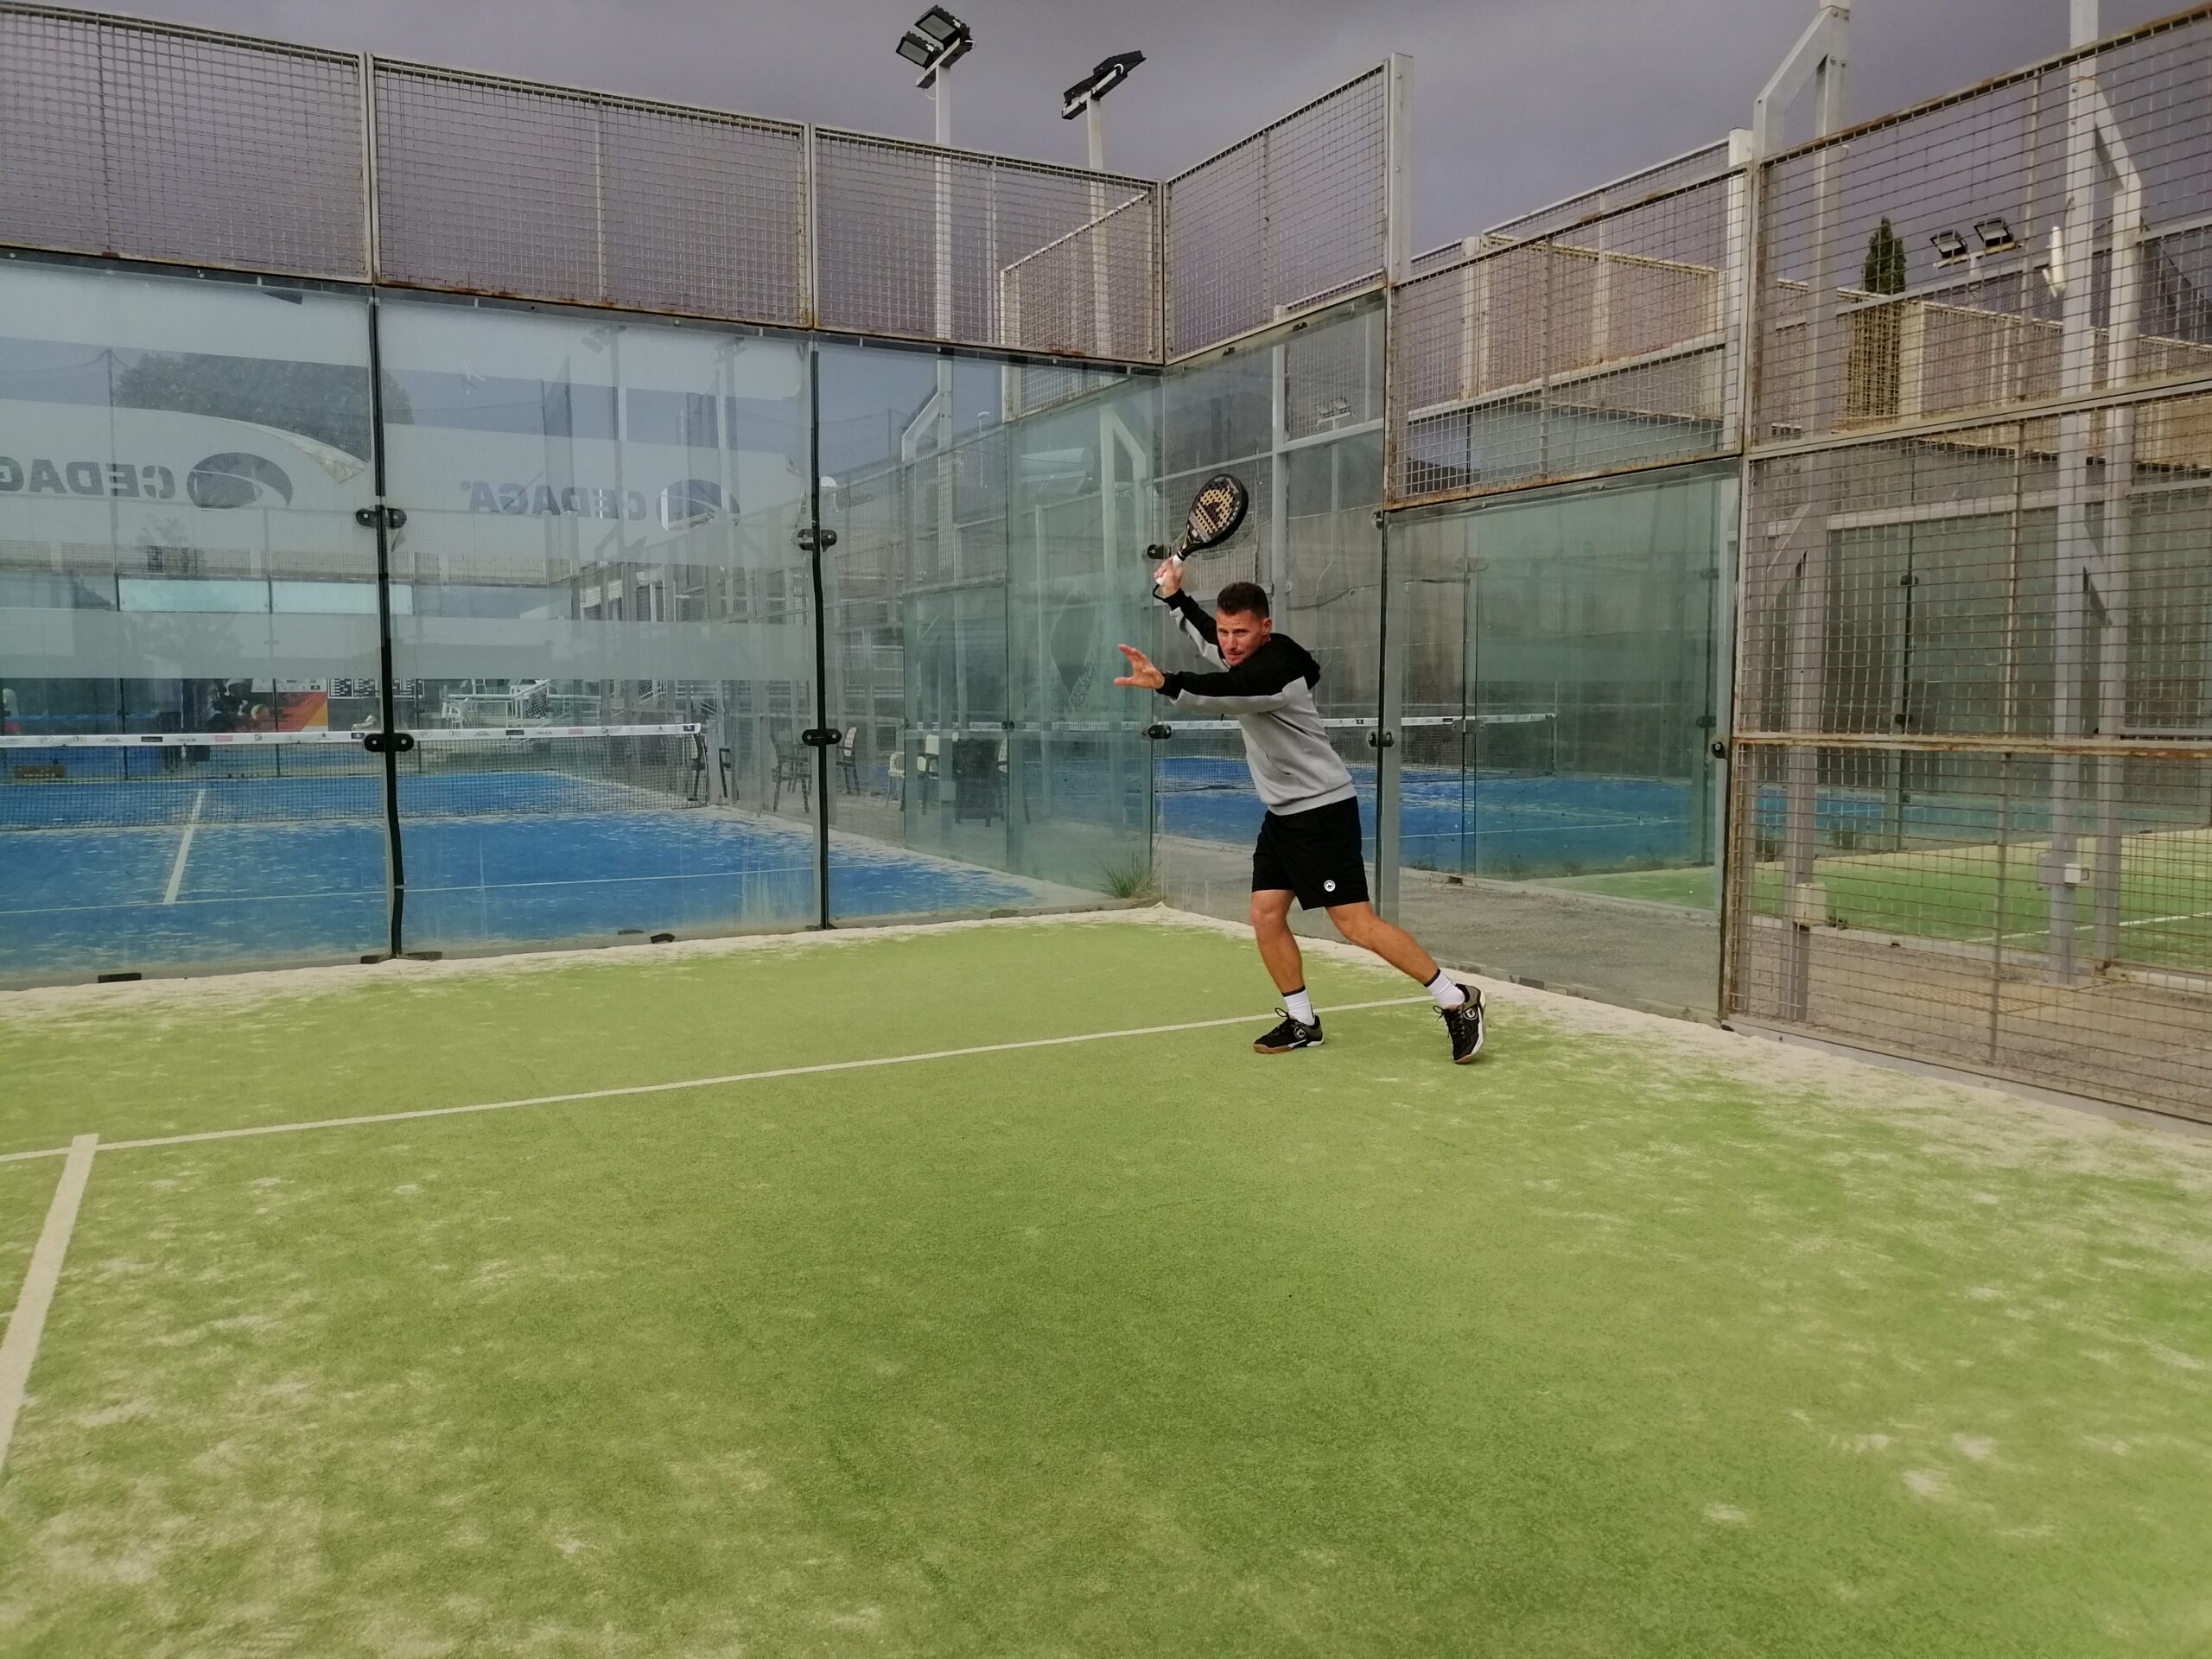 Technical padel : the forehand attack